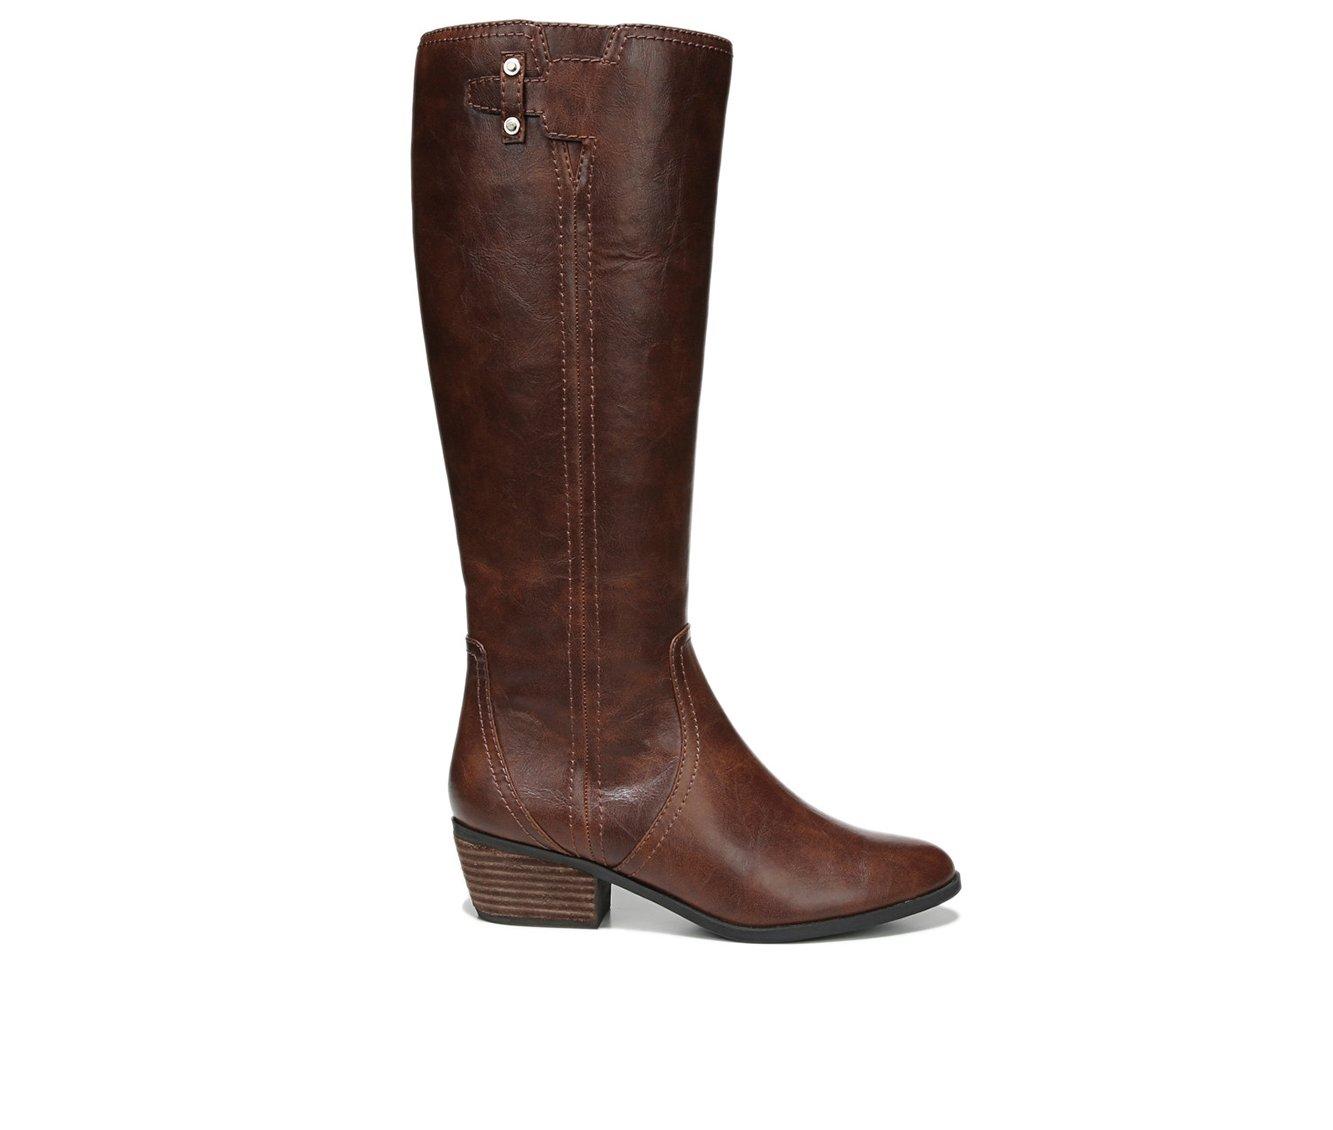 Women's Knee High & Riding Boots | Shoe Carnival